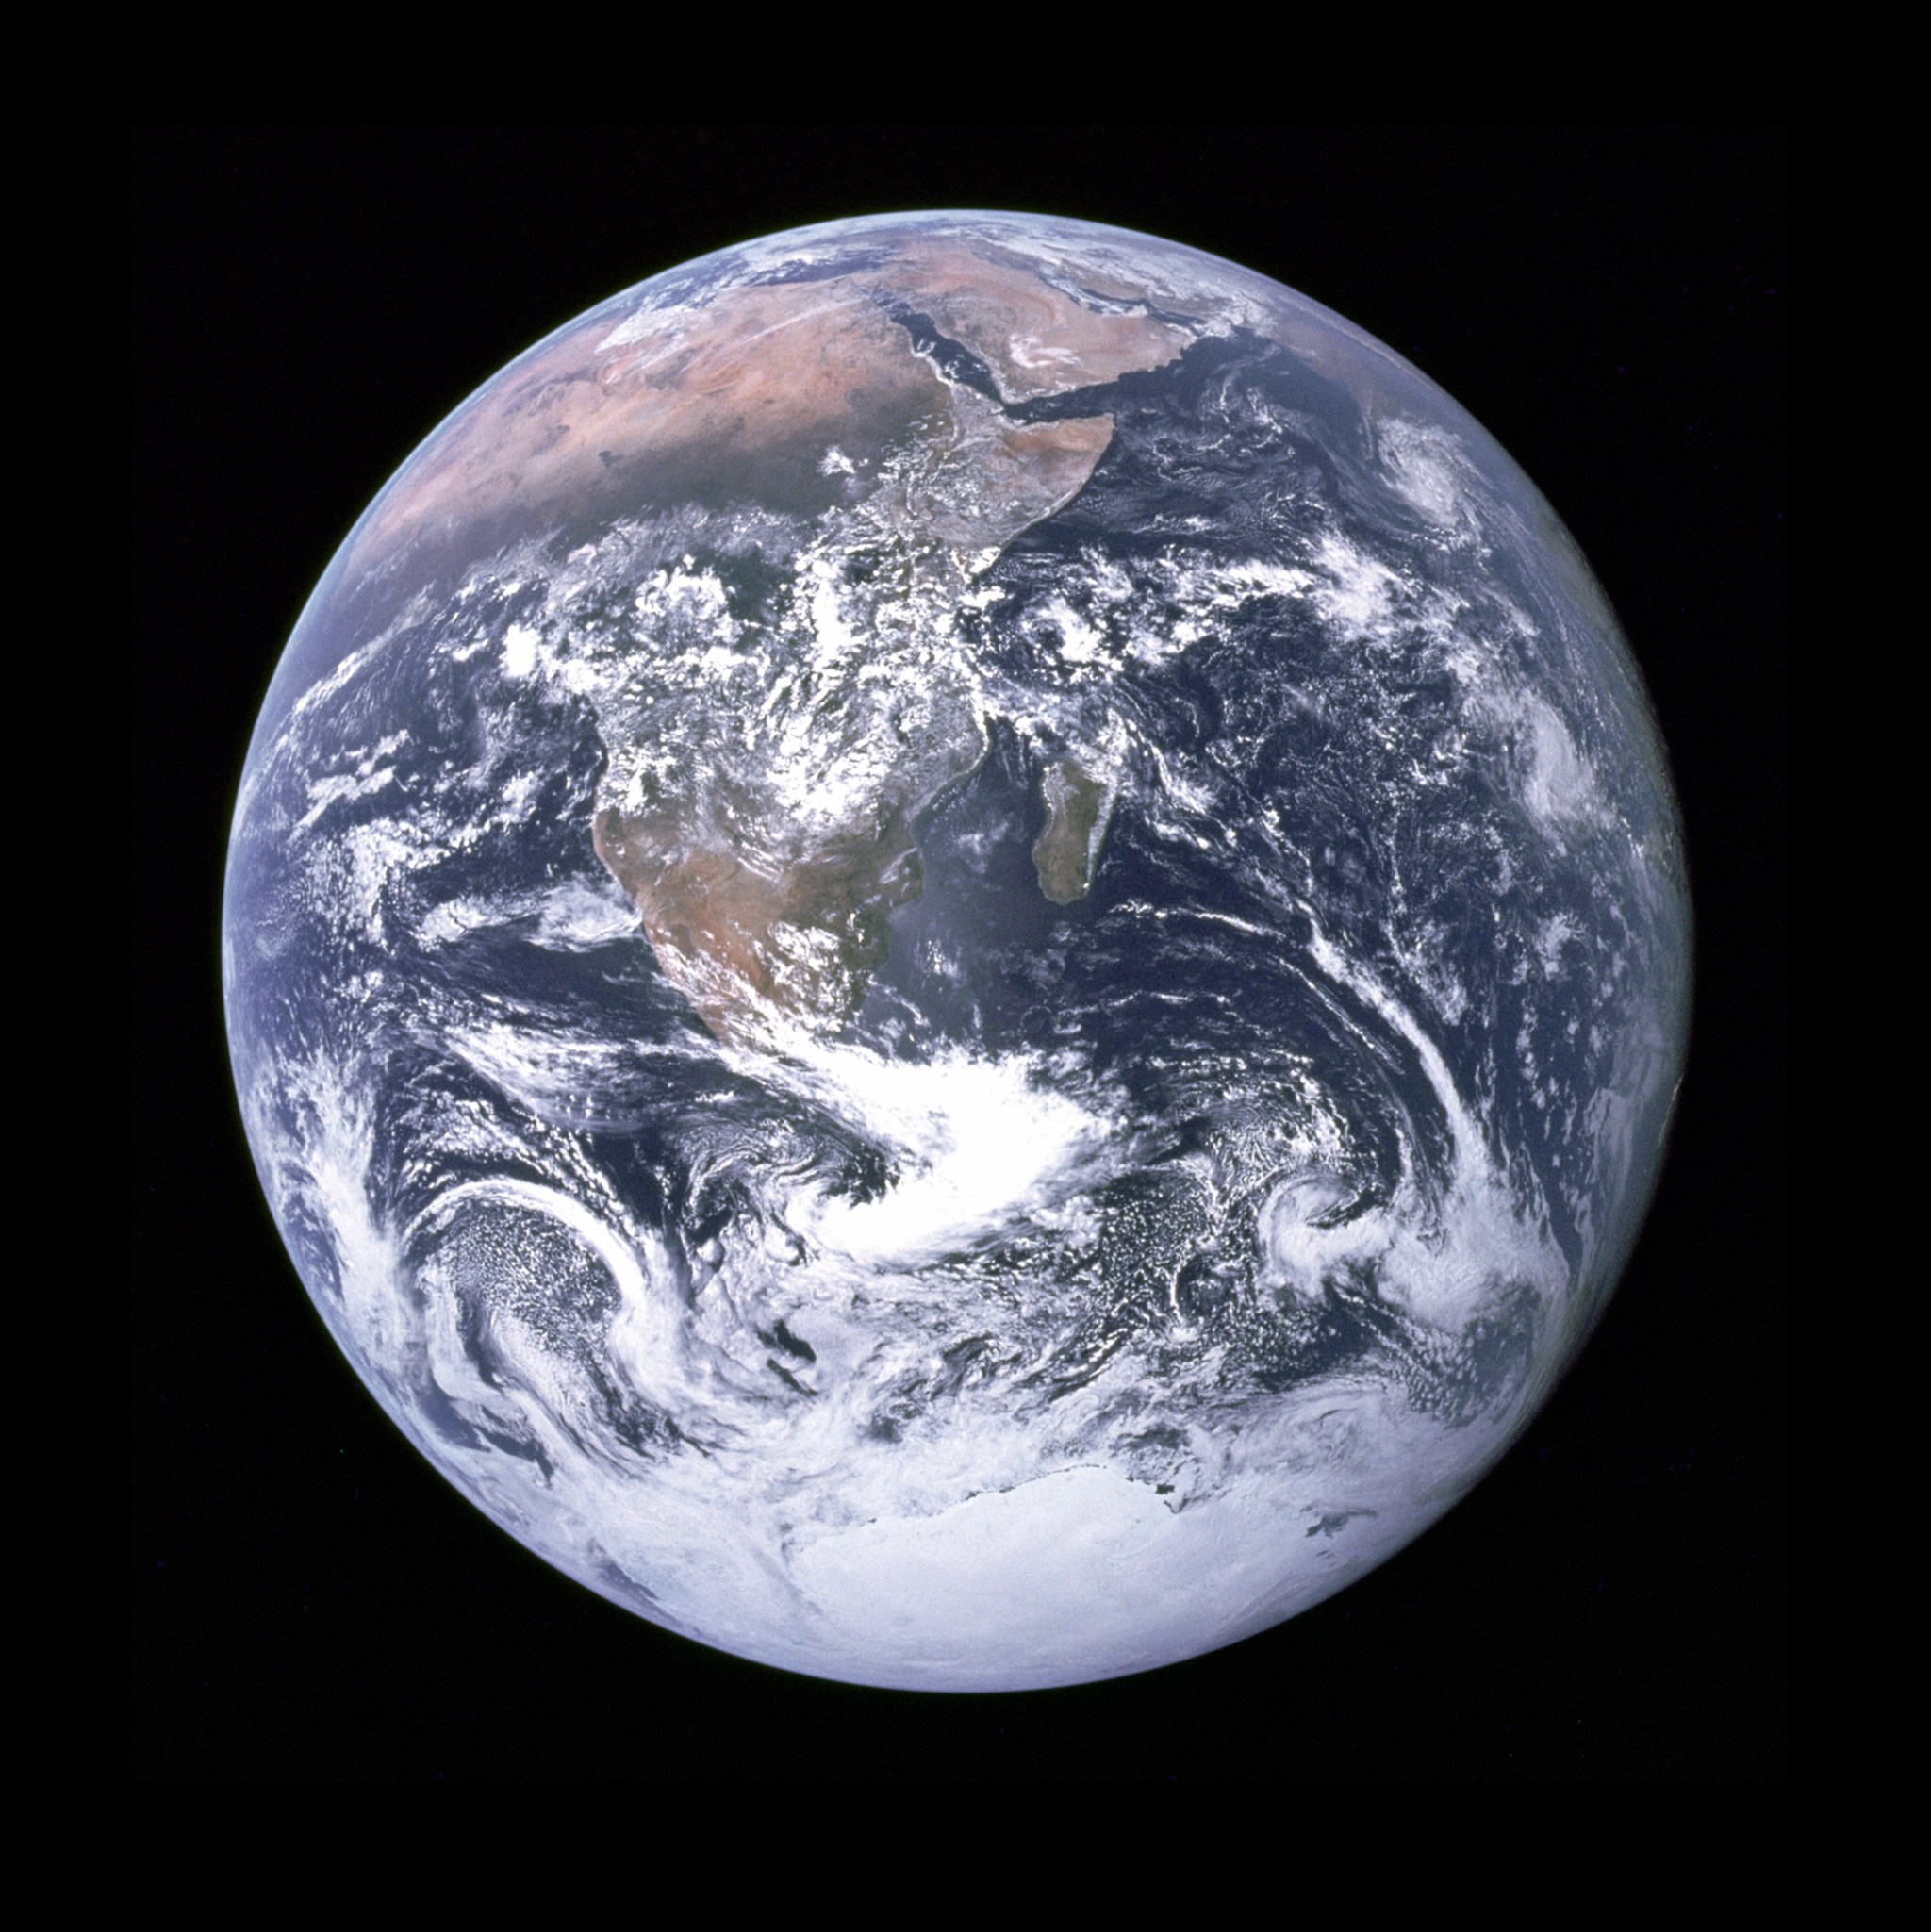 "Blue Marble" image of Earth taken by Apollo 17